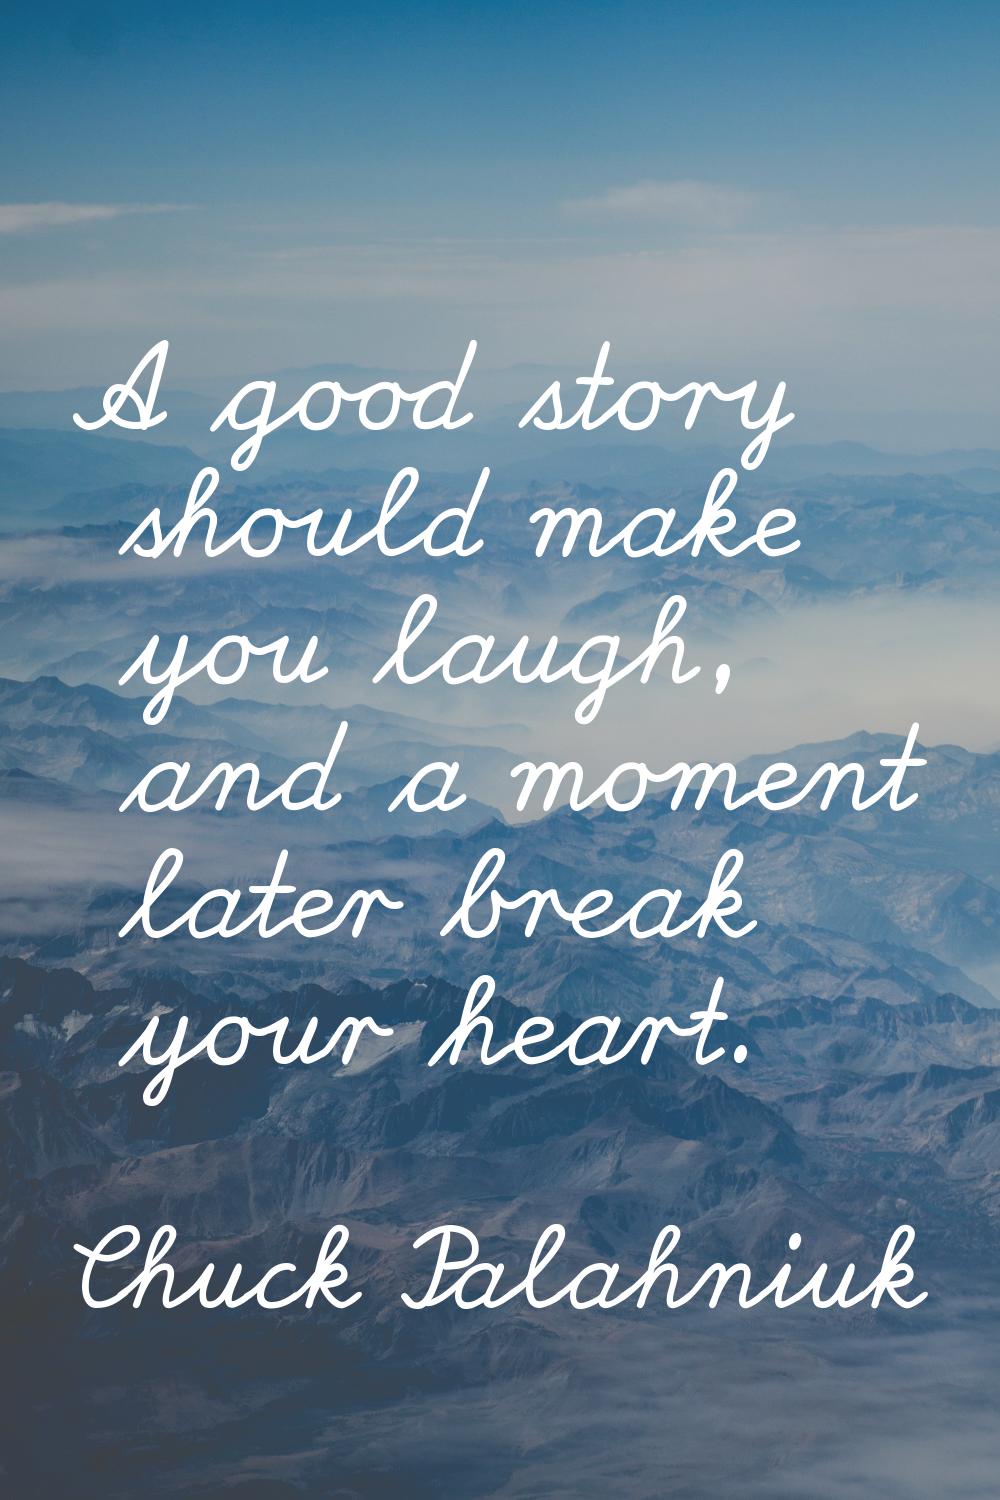 A good story should make you laugh, and a moment later break your heart.